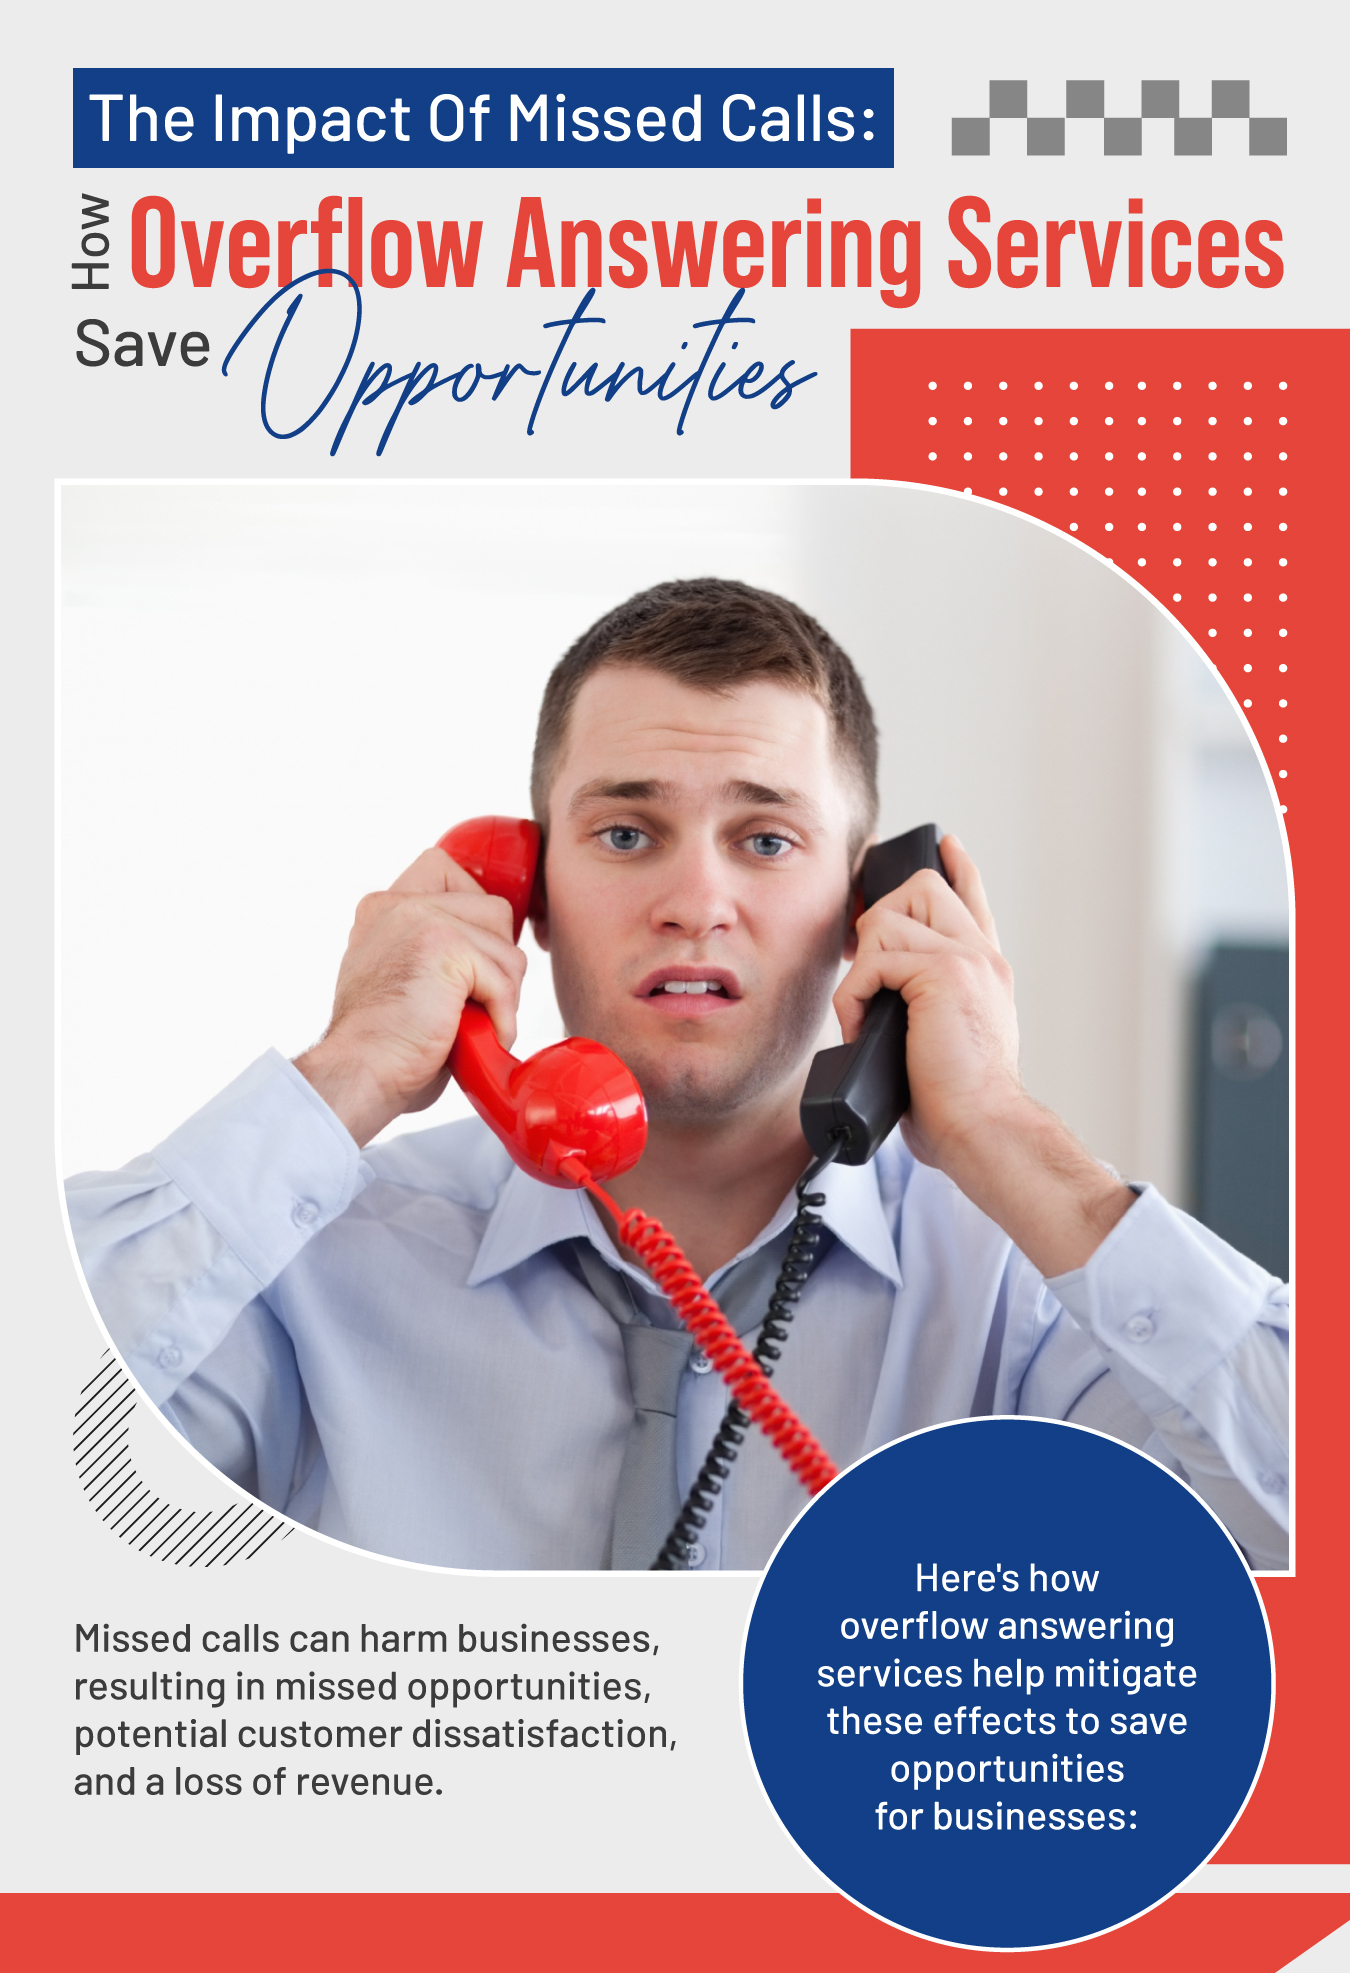 The Impact of Missed Calls: How Overflow Answering Services Save Opportunities – An Info-graphic